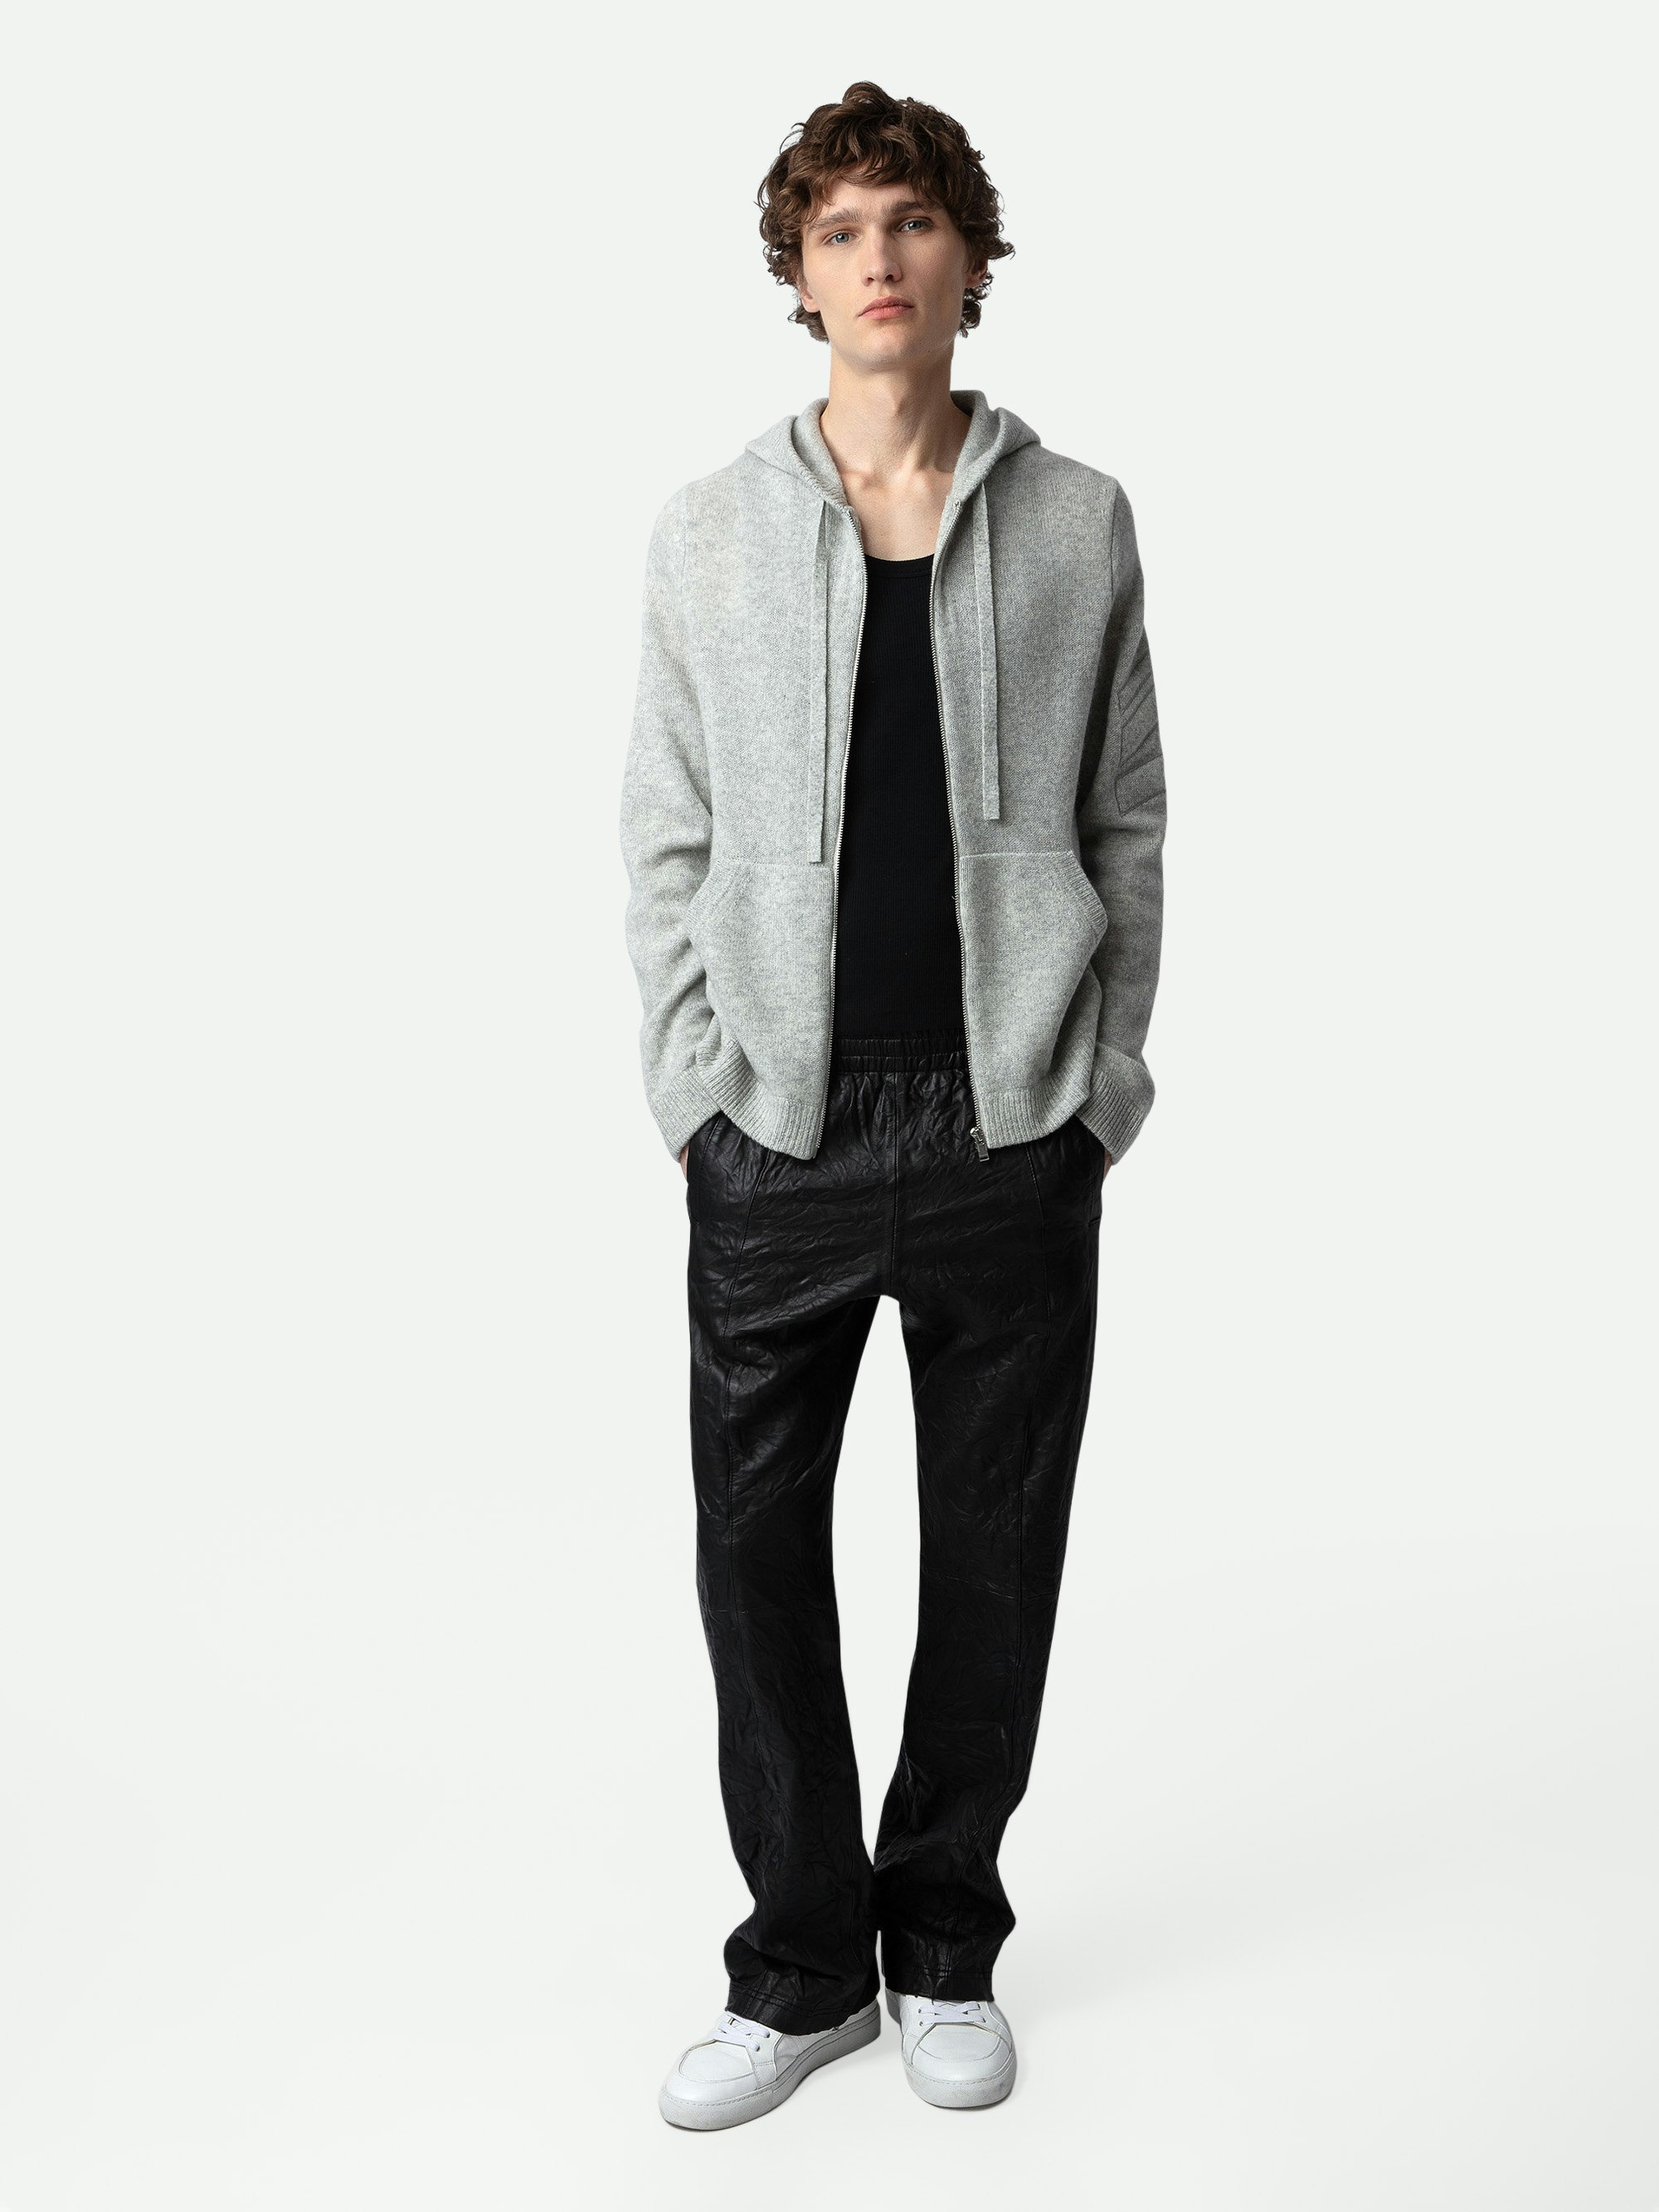 Men's new chic and trendy clothing | Zadig&Voltaire